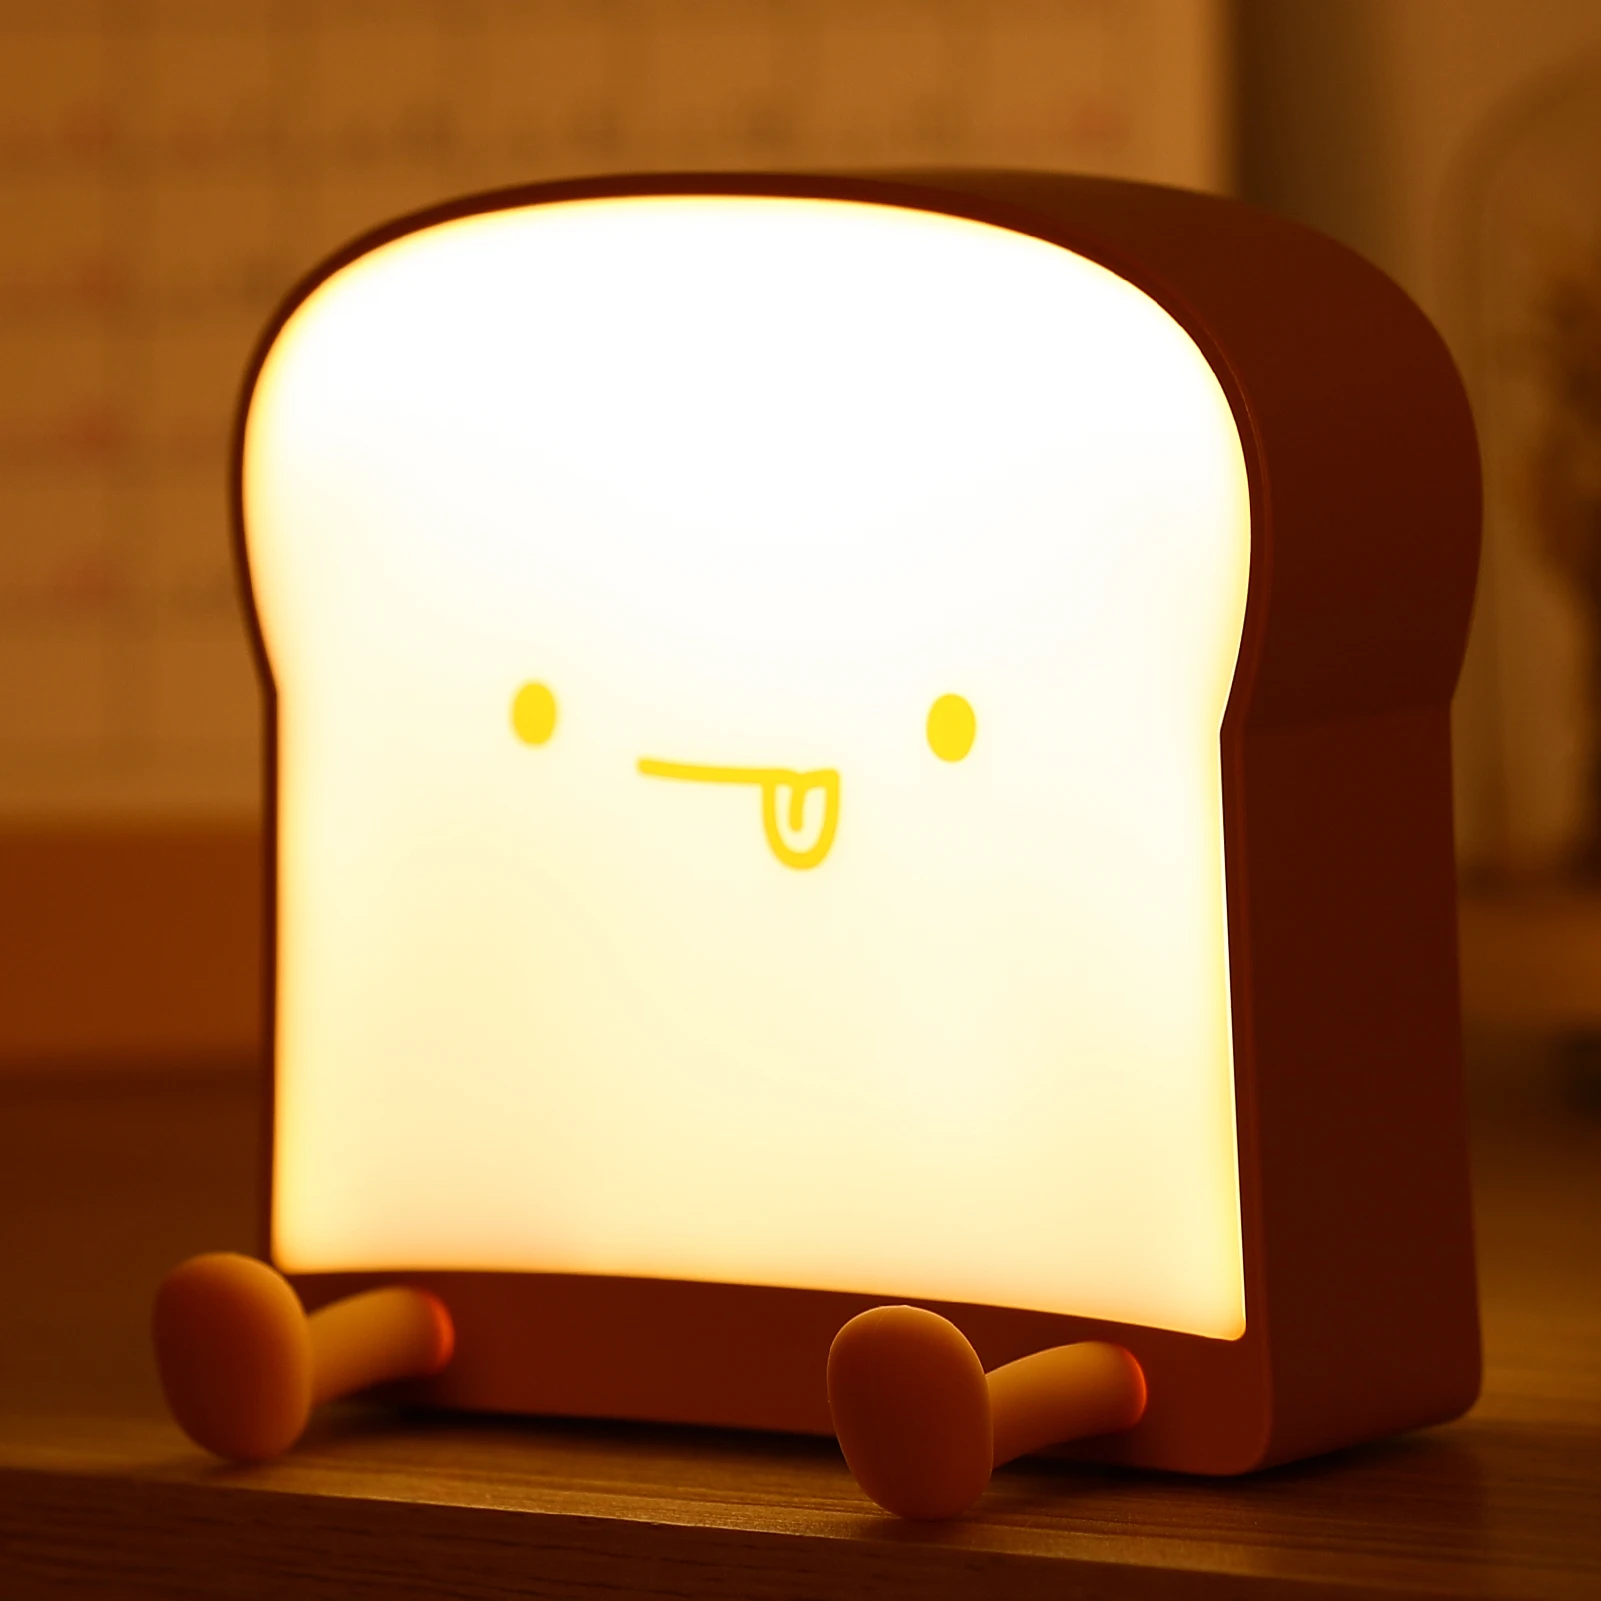 Cartoon Toast Bread LED Night Lights Touch Sensor USB Rechargeable Mobile Phone Holder Silicone Bedroom Desktop Decor Lamp Gifts